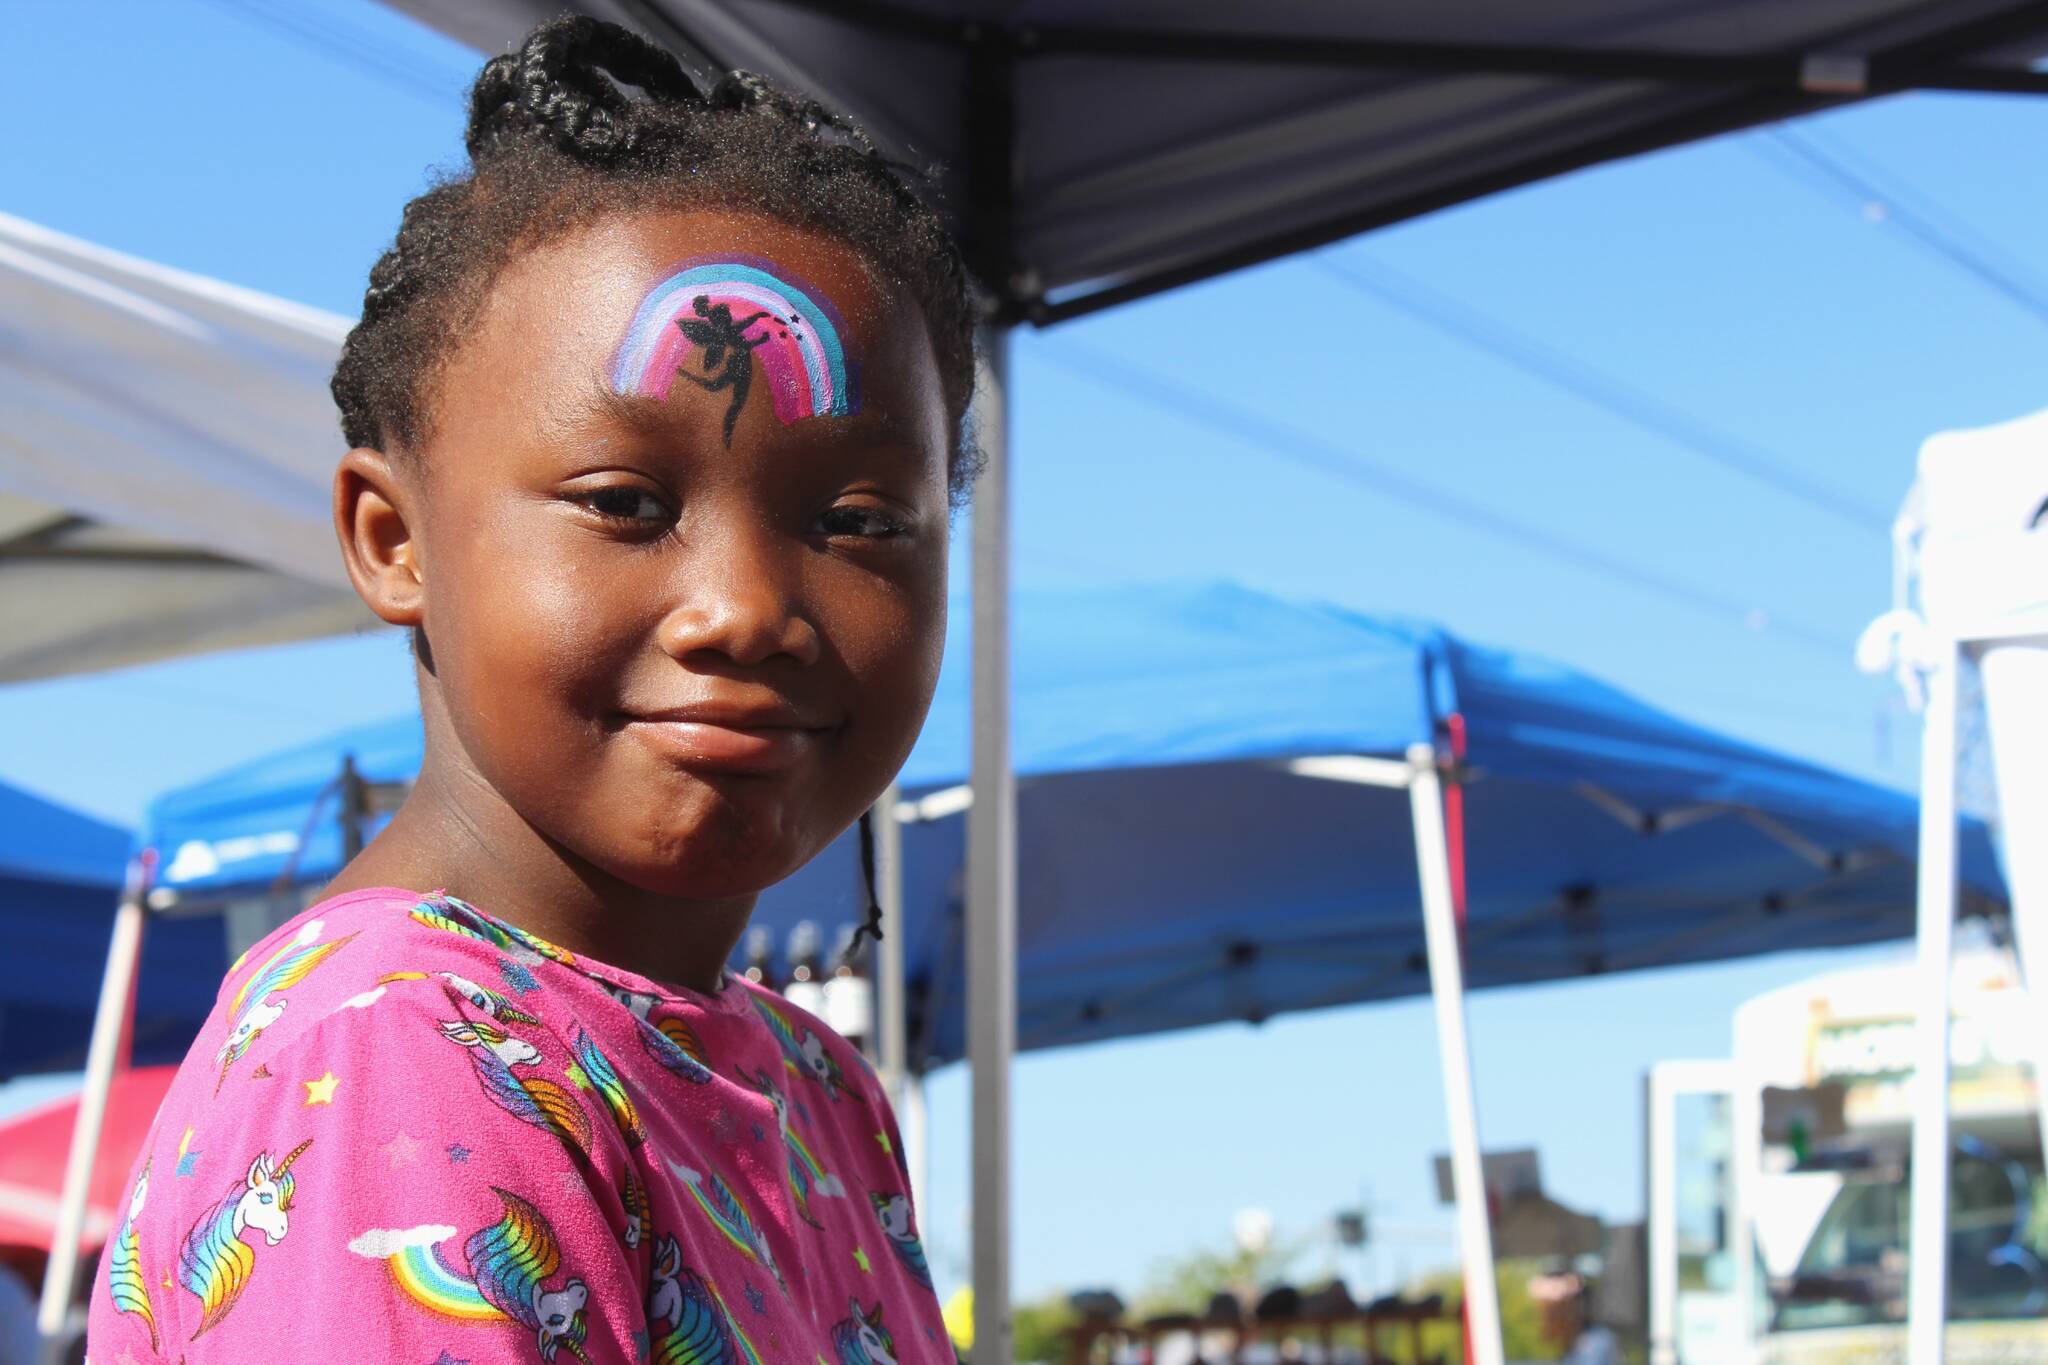 Lealiana McMilion, 6, smiles after visiting a face painter at the Federal Way Farmers Market. Alex Bruell / The Mirror